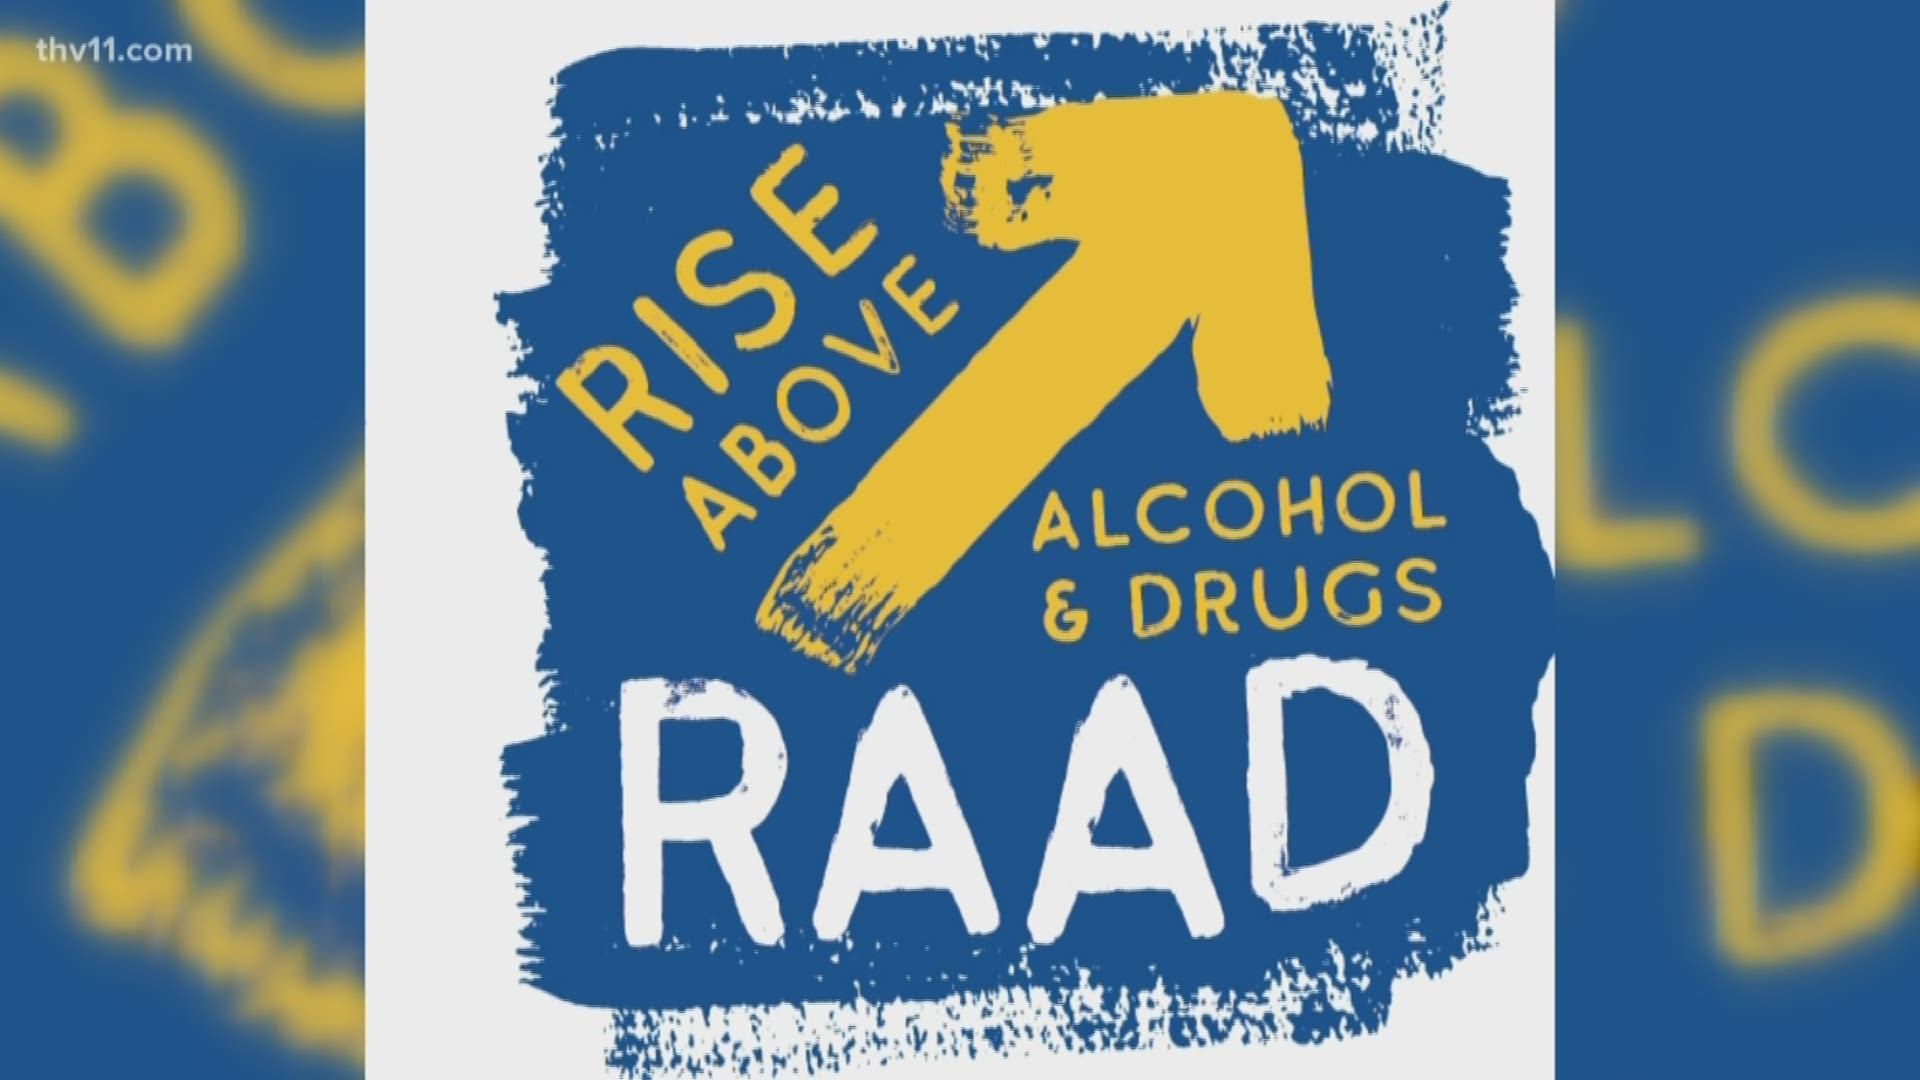 How do we get today's youth to make the decision to "Rise Above Alcohol and Drugs"? RAAD says together we can! THV 11 is proud to be apart of this initiative.